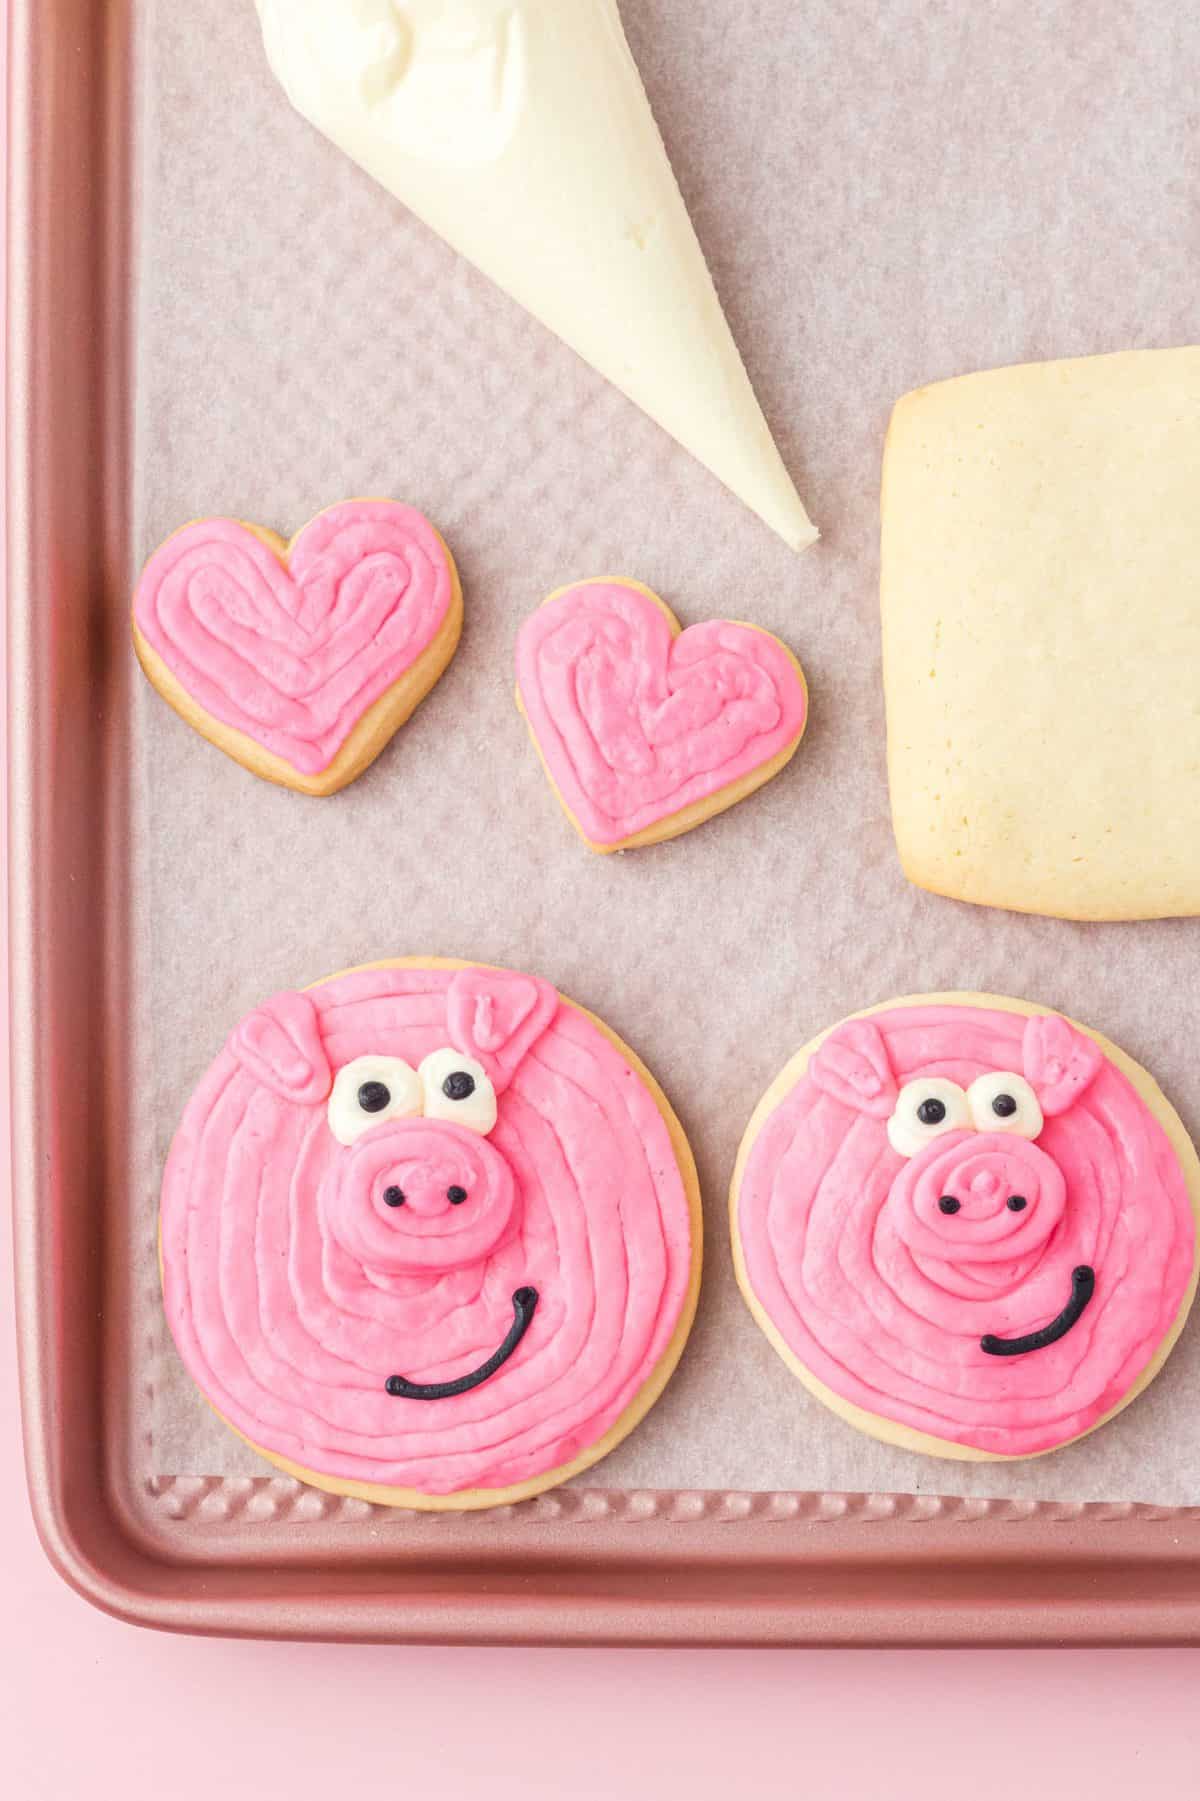 adding the eyes and mouth to the pig sugar cookies